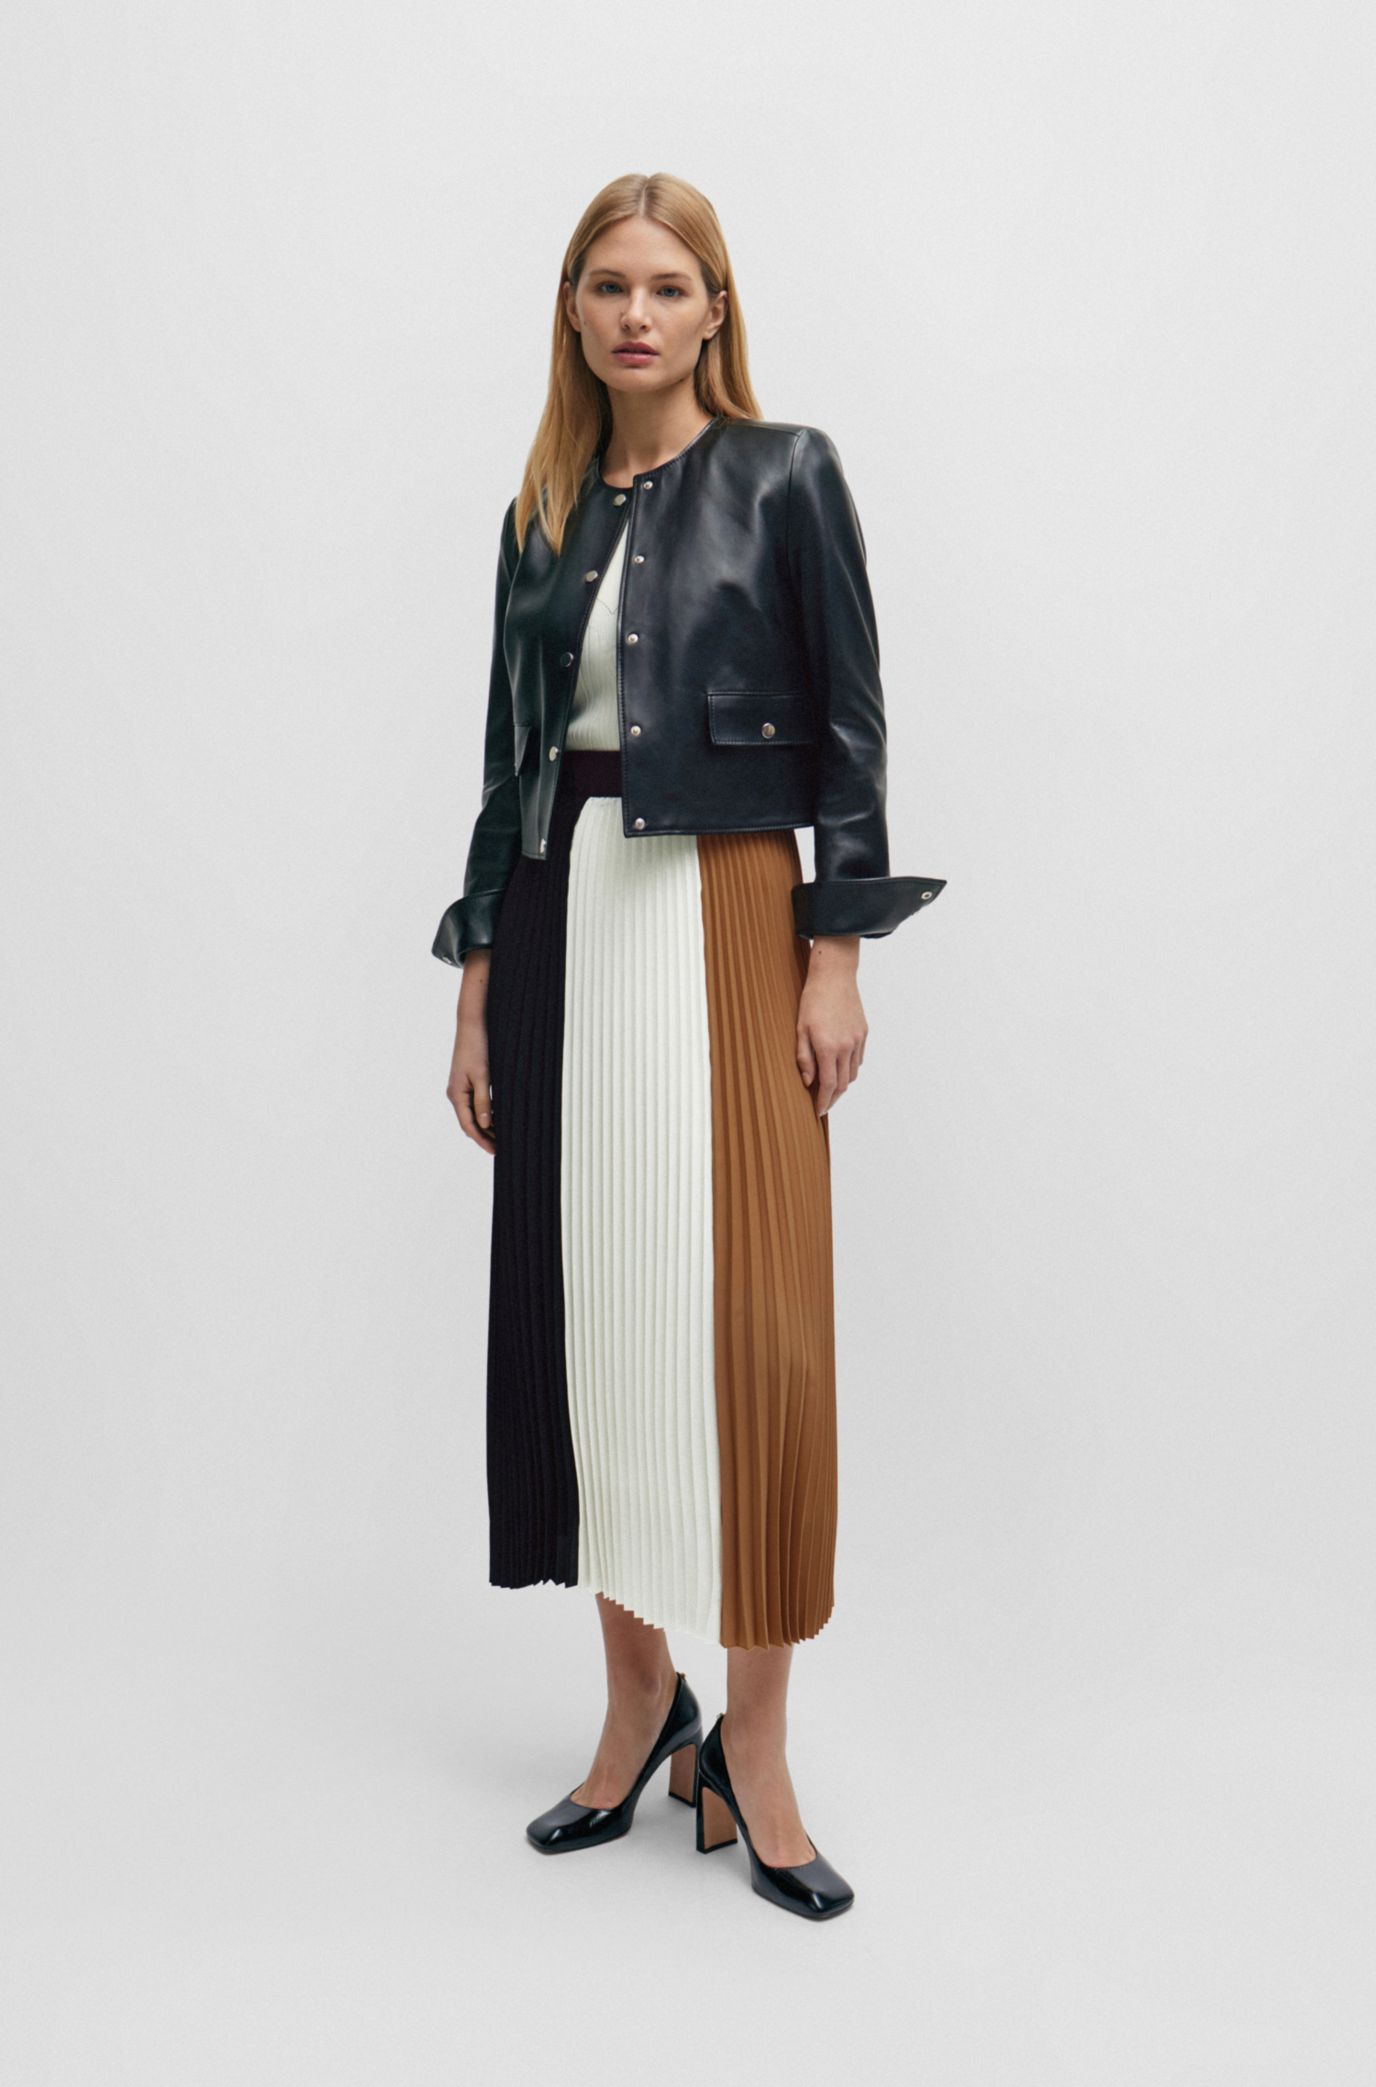 BOSS - Plissé skirt in colors signature with high-rise waist